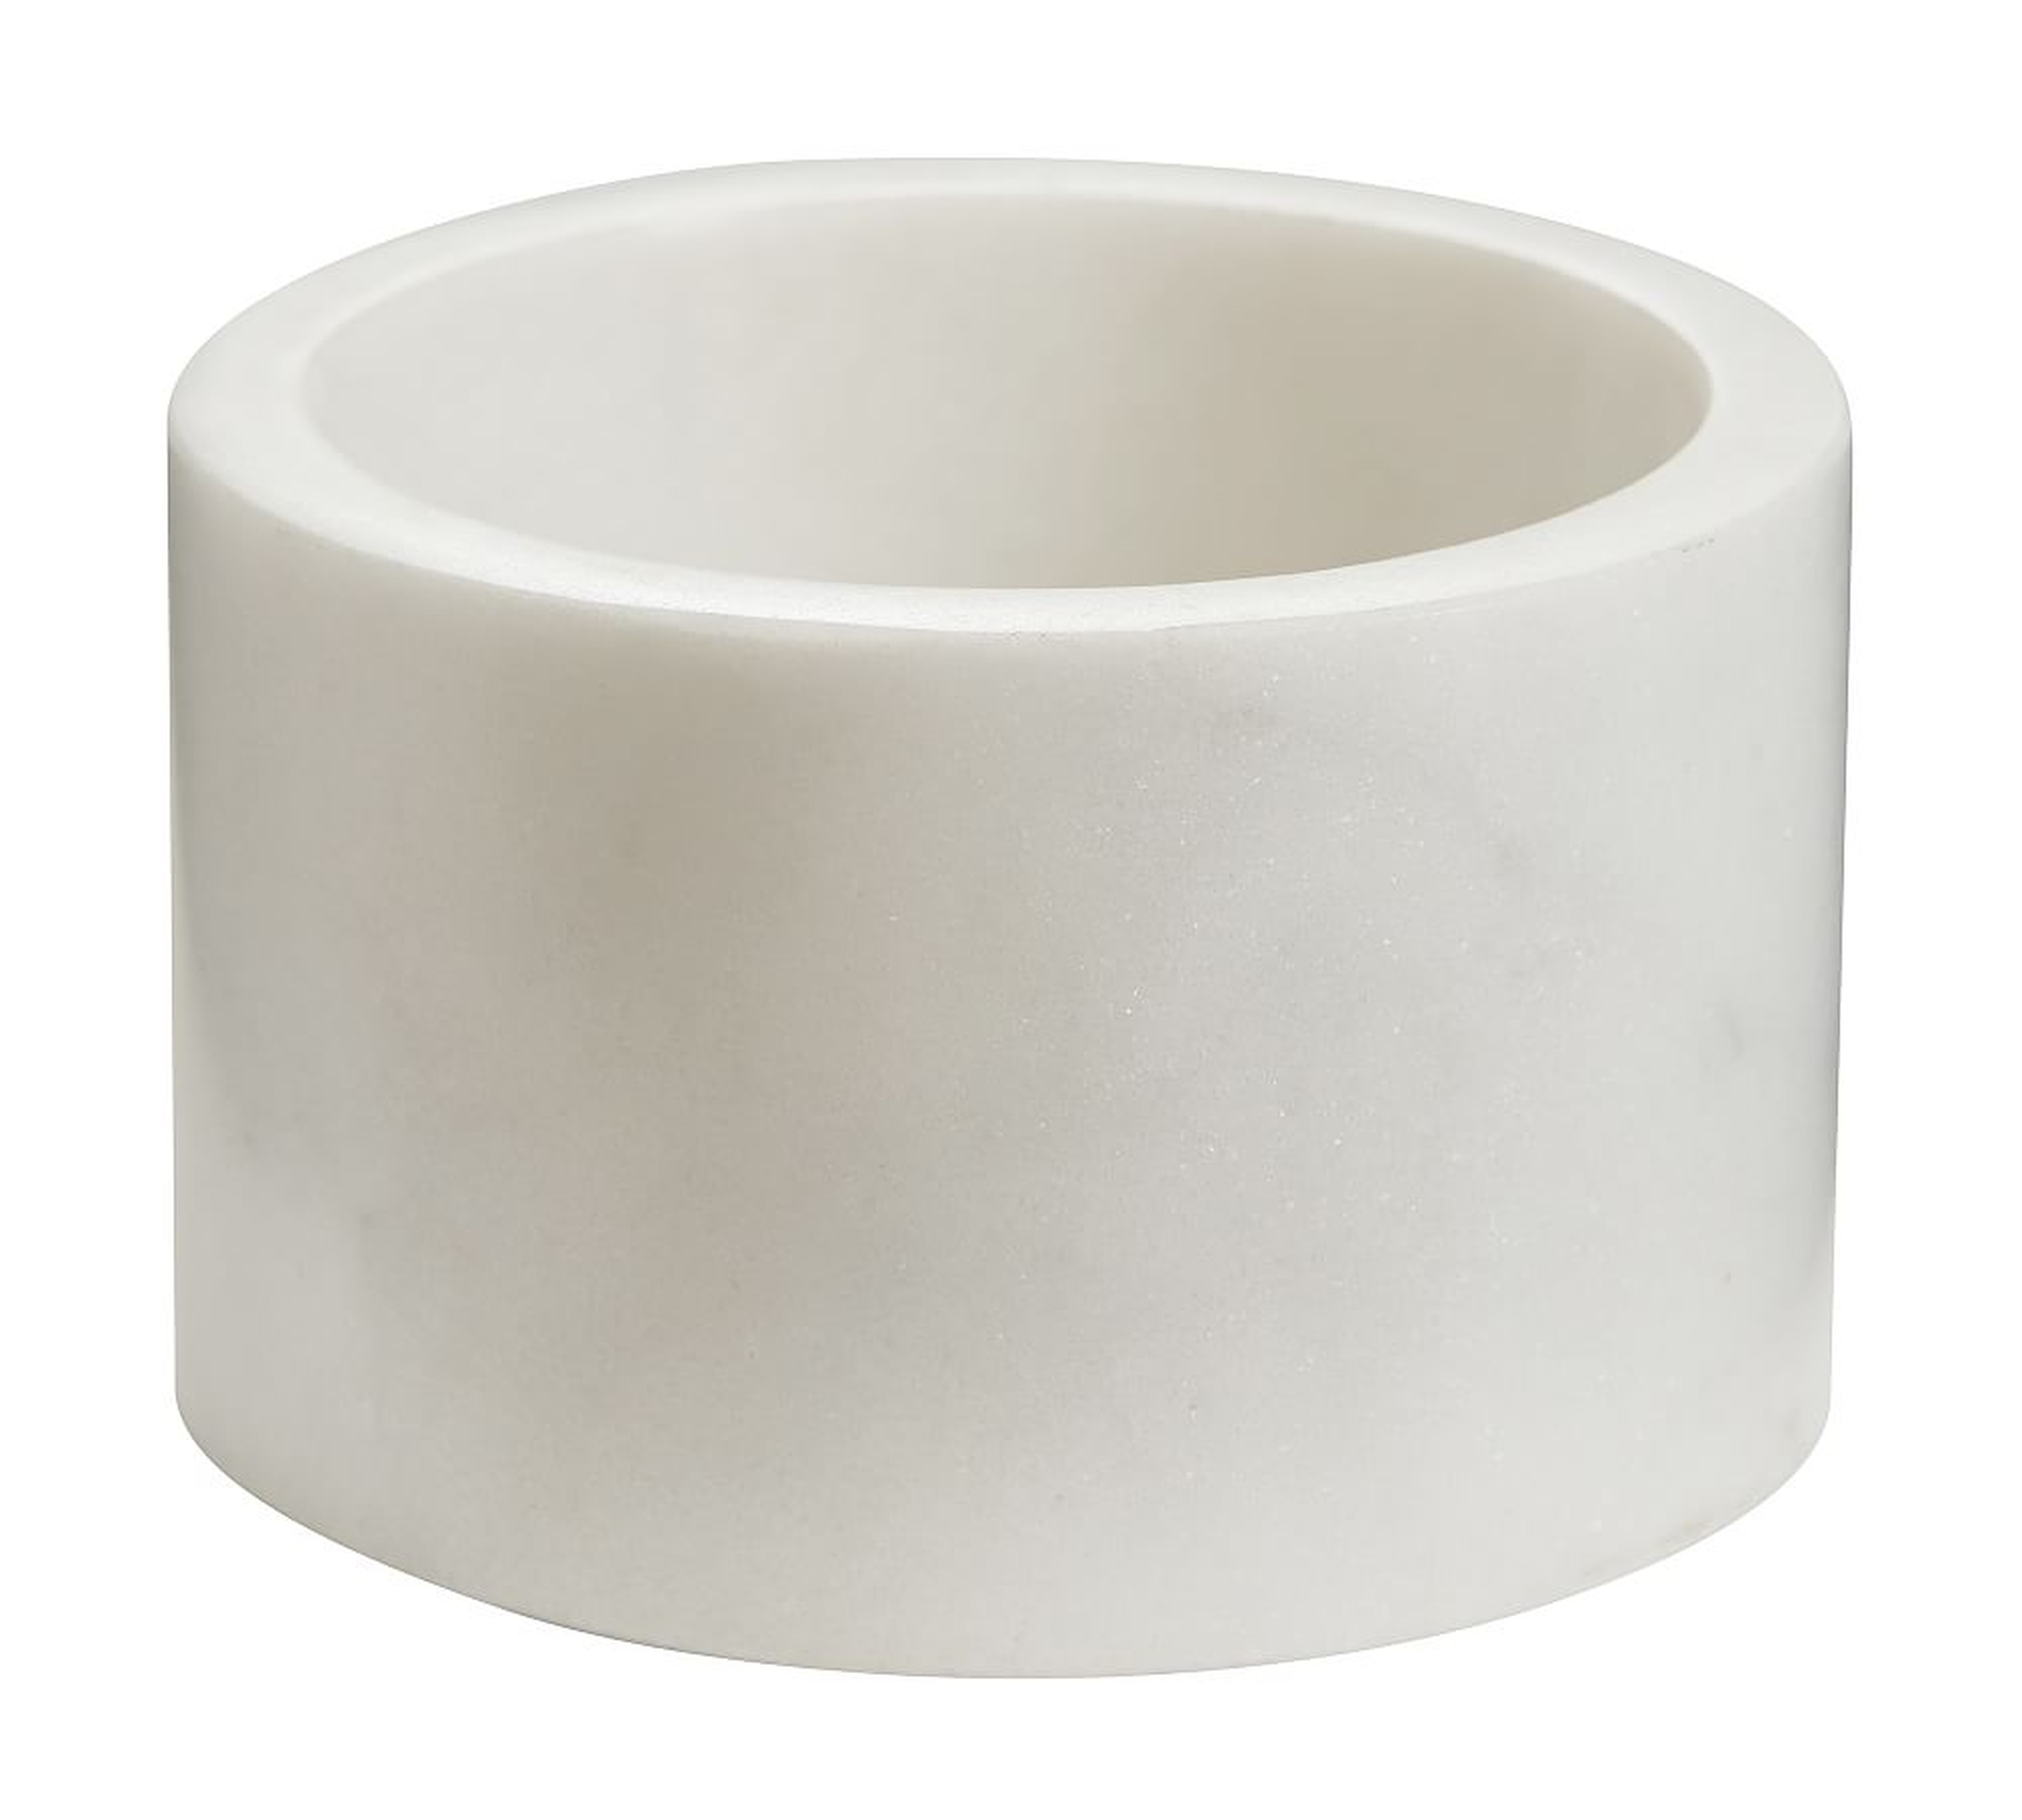 Marble Desk Accessory, Low Bowl - Pottery Barn